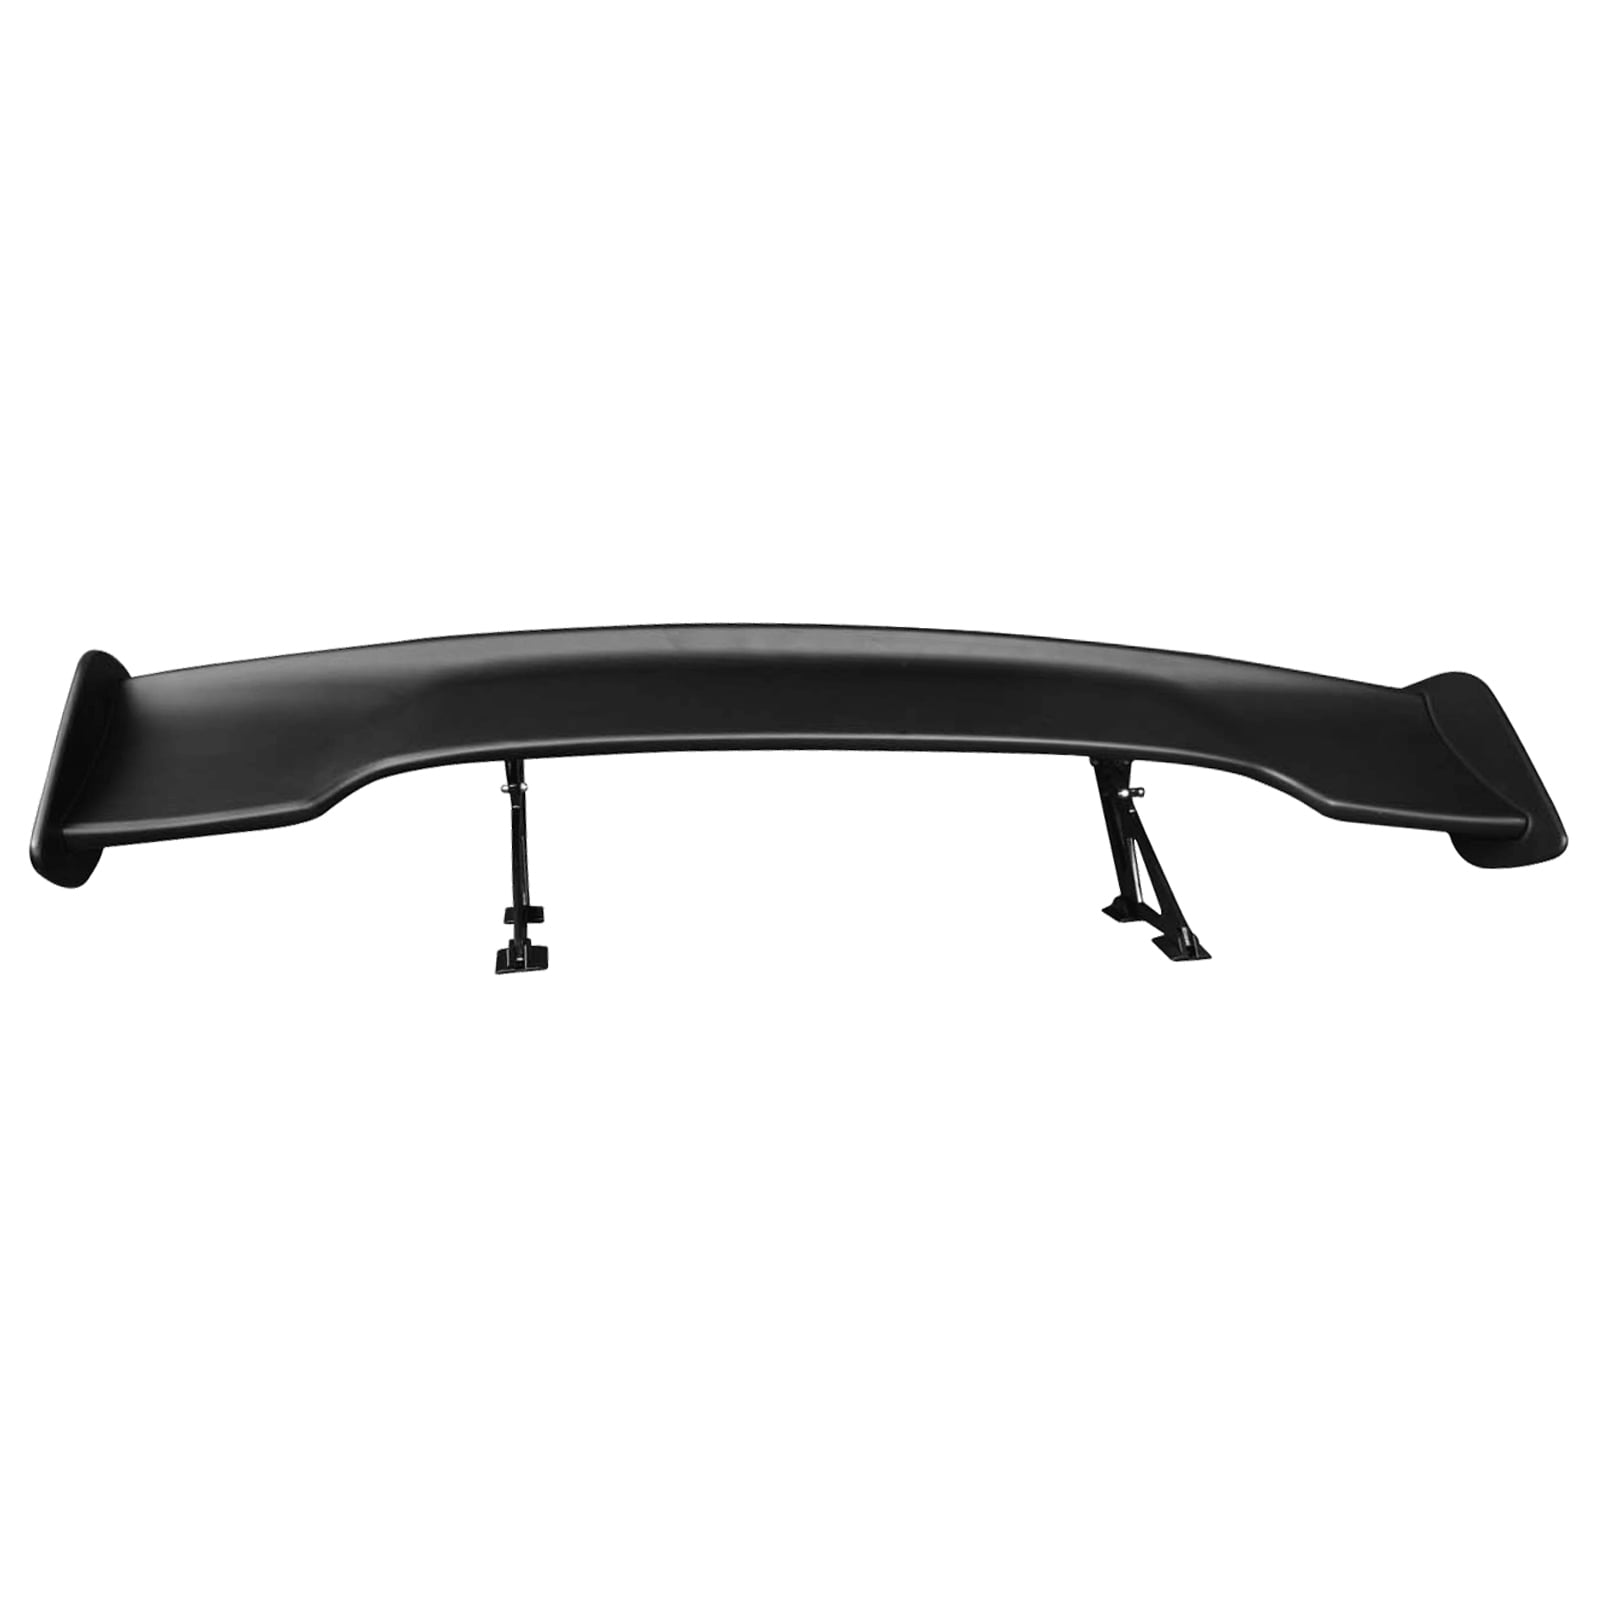 NEW UNIVERSAL 51" DRAGON GLOSSY BLACK ABS GT REAR TRUNK ADJUSTABLE SPOILER WING 